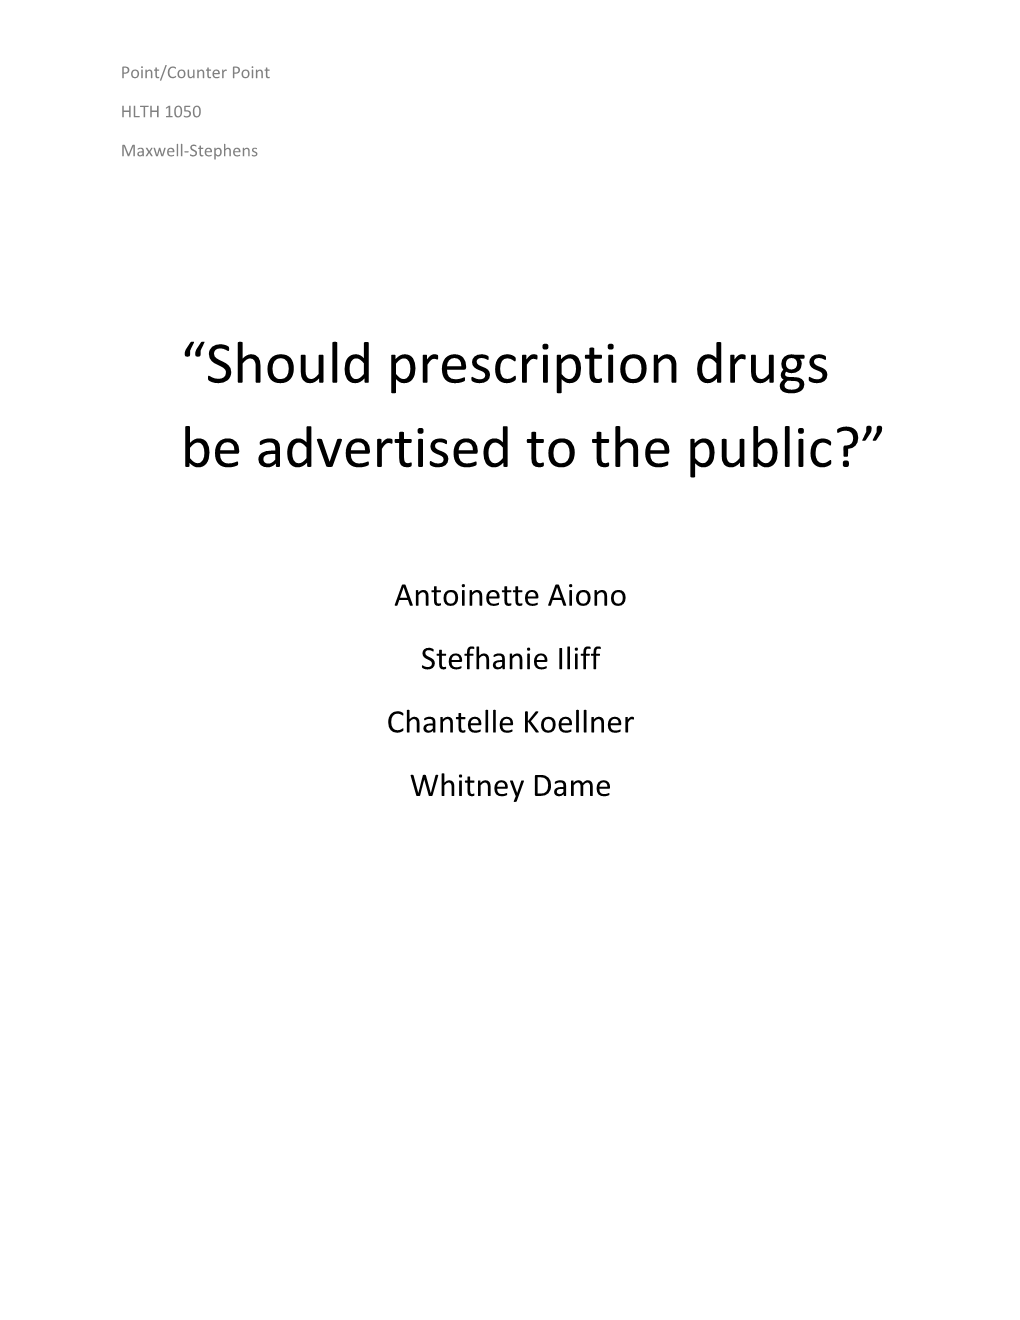 Should Prescription Drugs Be Advertised to the Public